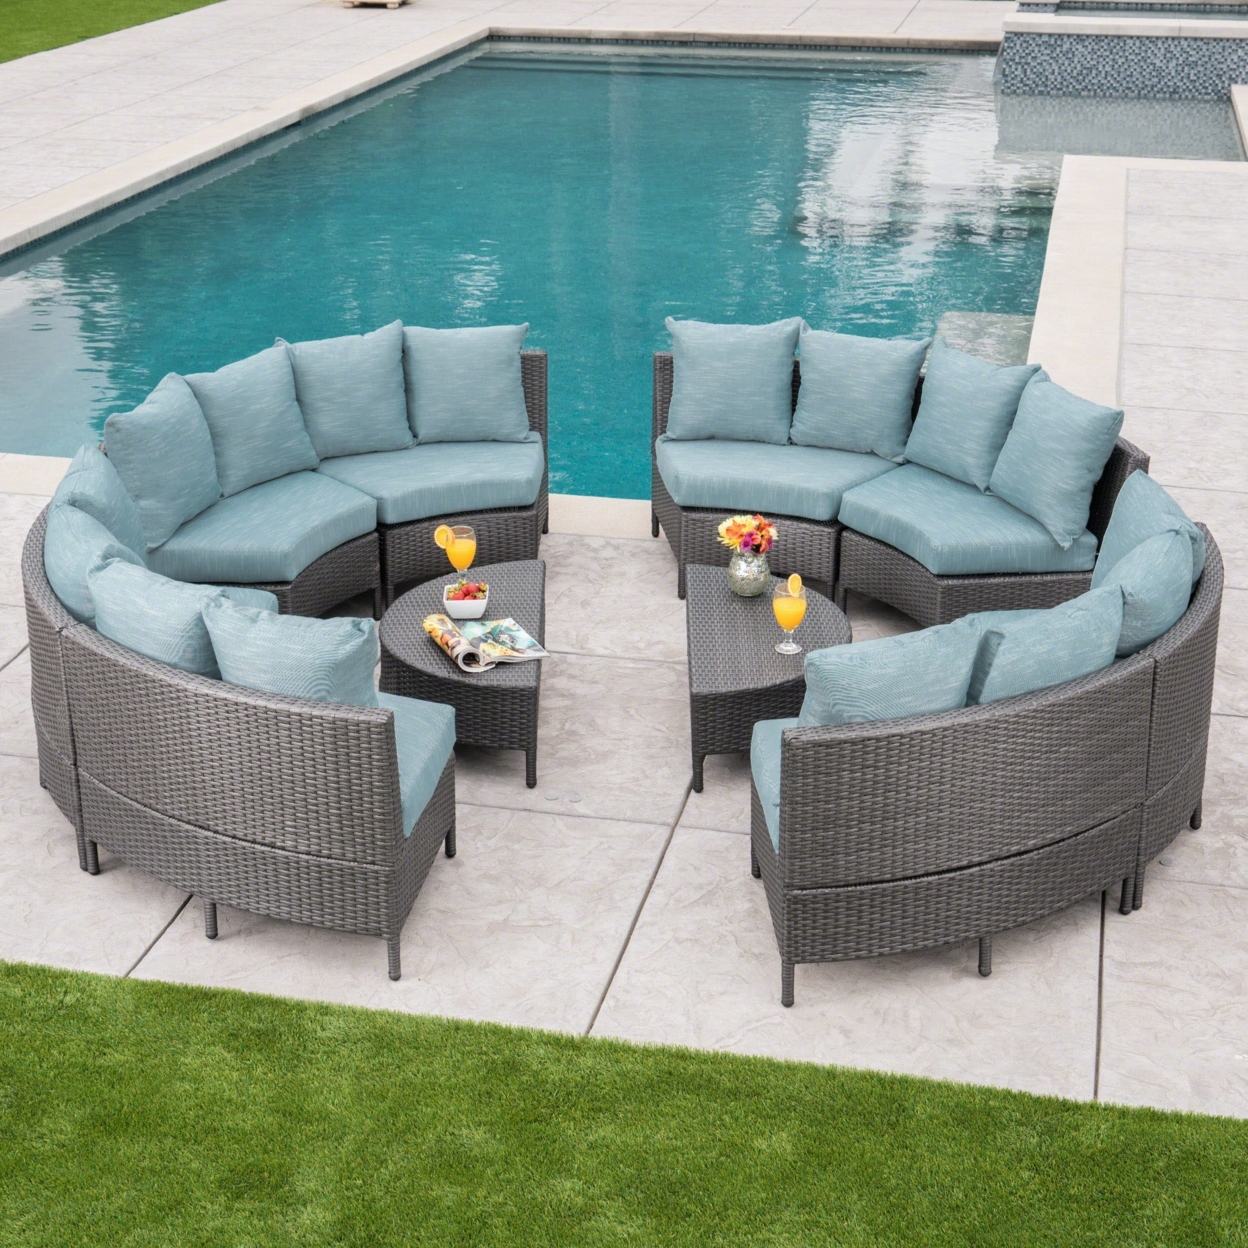 Venice Outdoor 10 Piece Gray Wicker Sectional Sofa Set With Teal Cushions